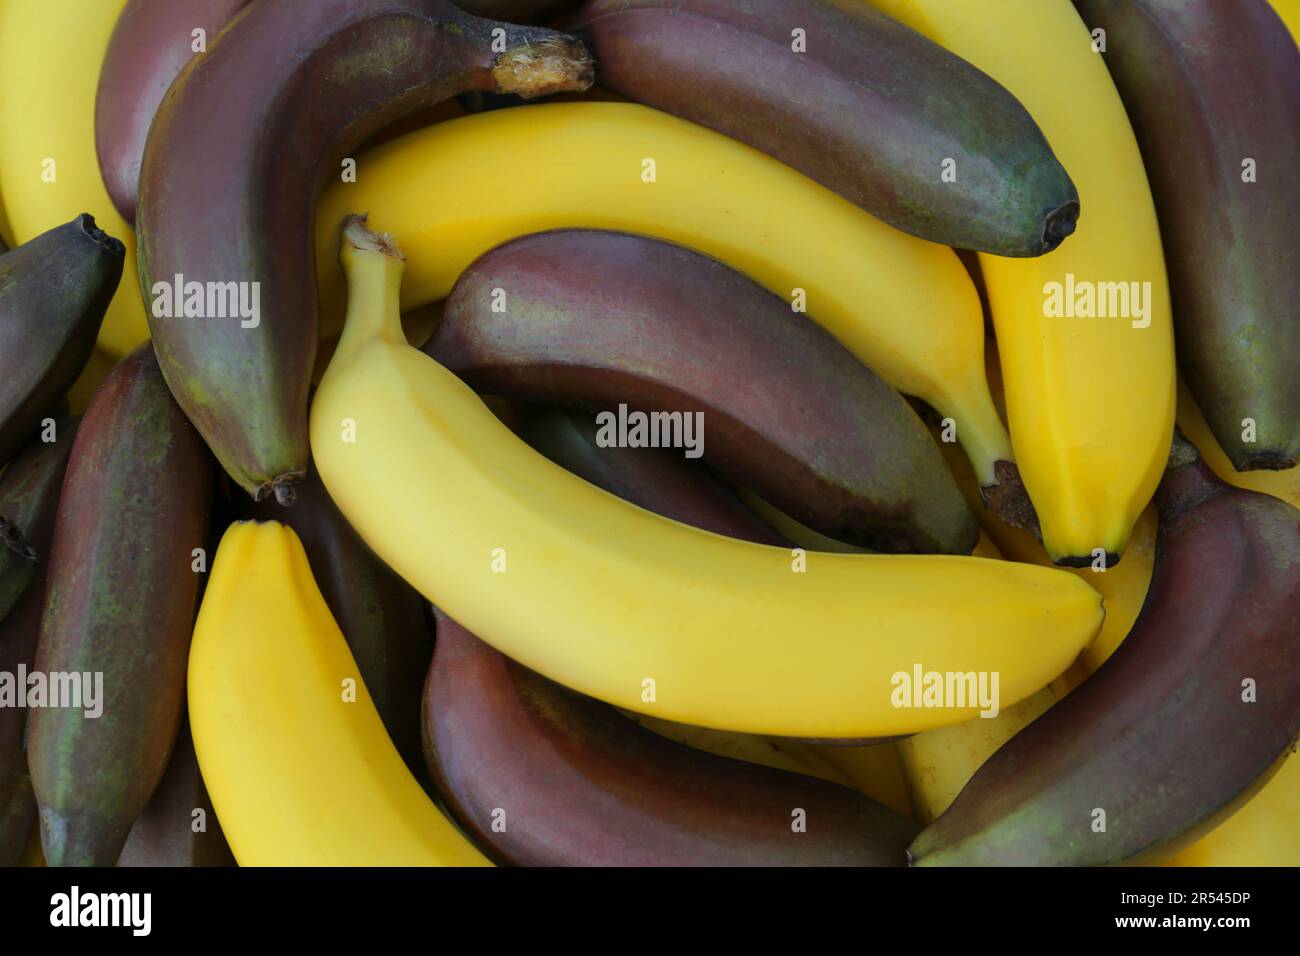 Different types of bananas as background, top view Stock Photo